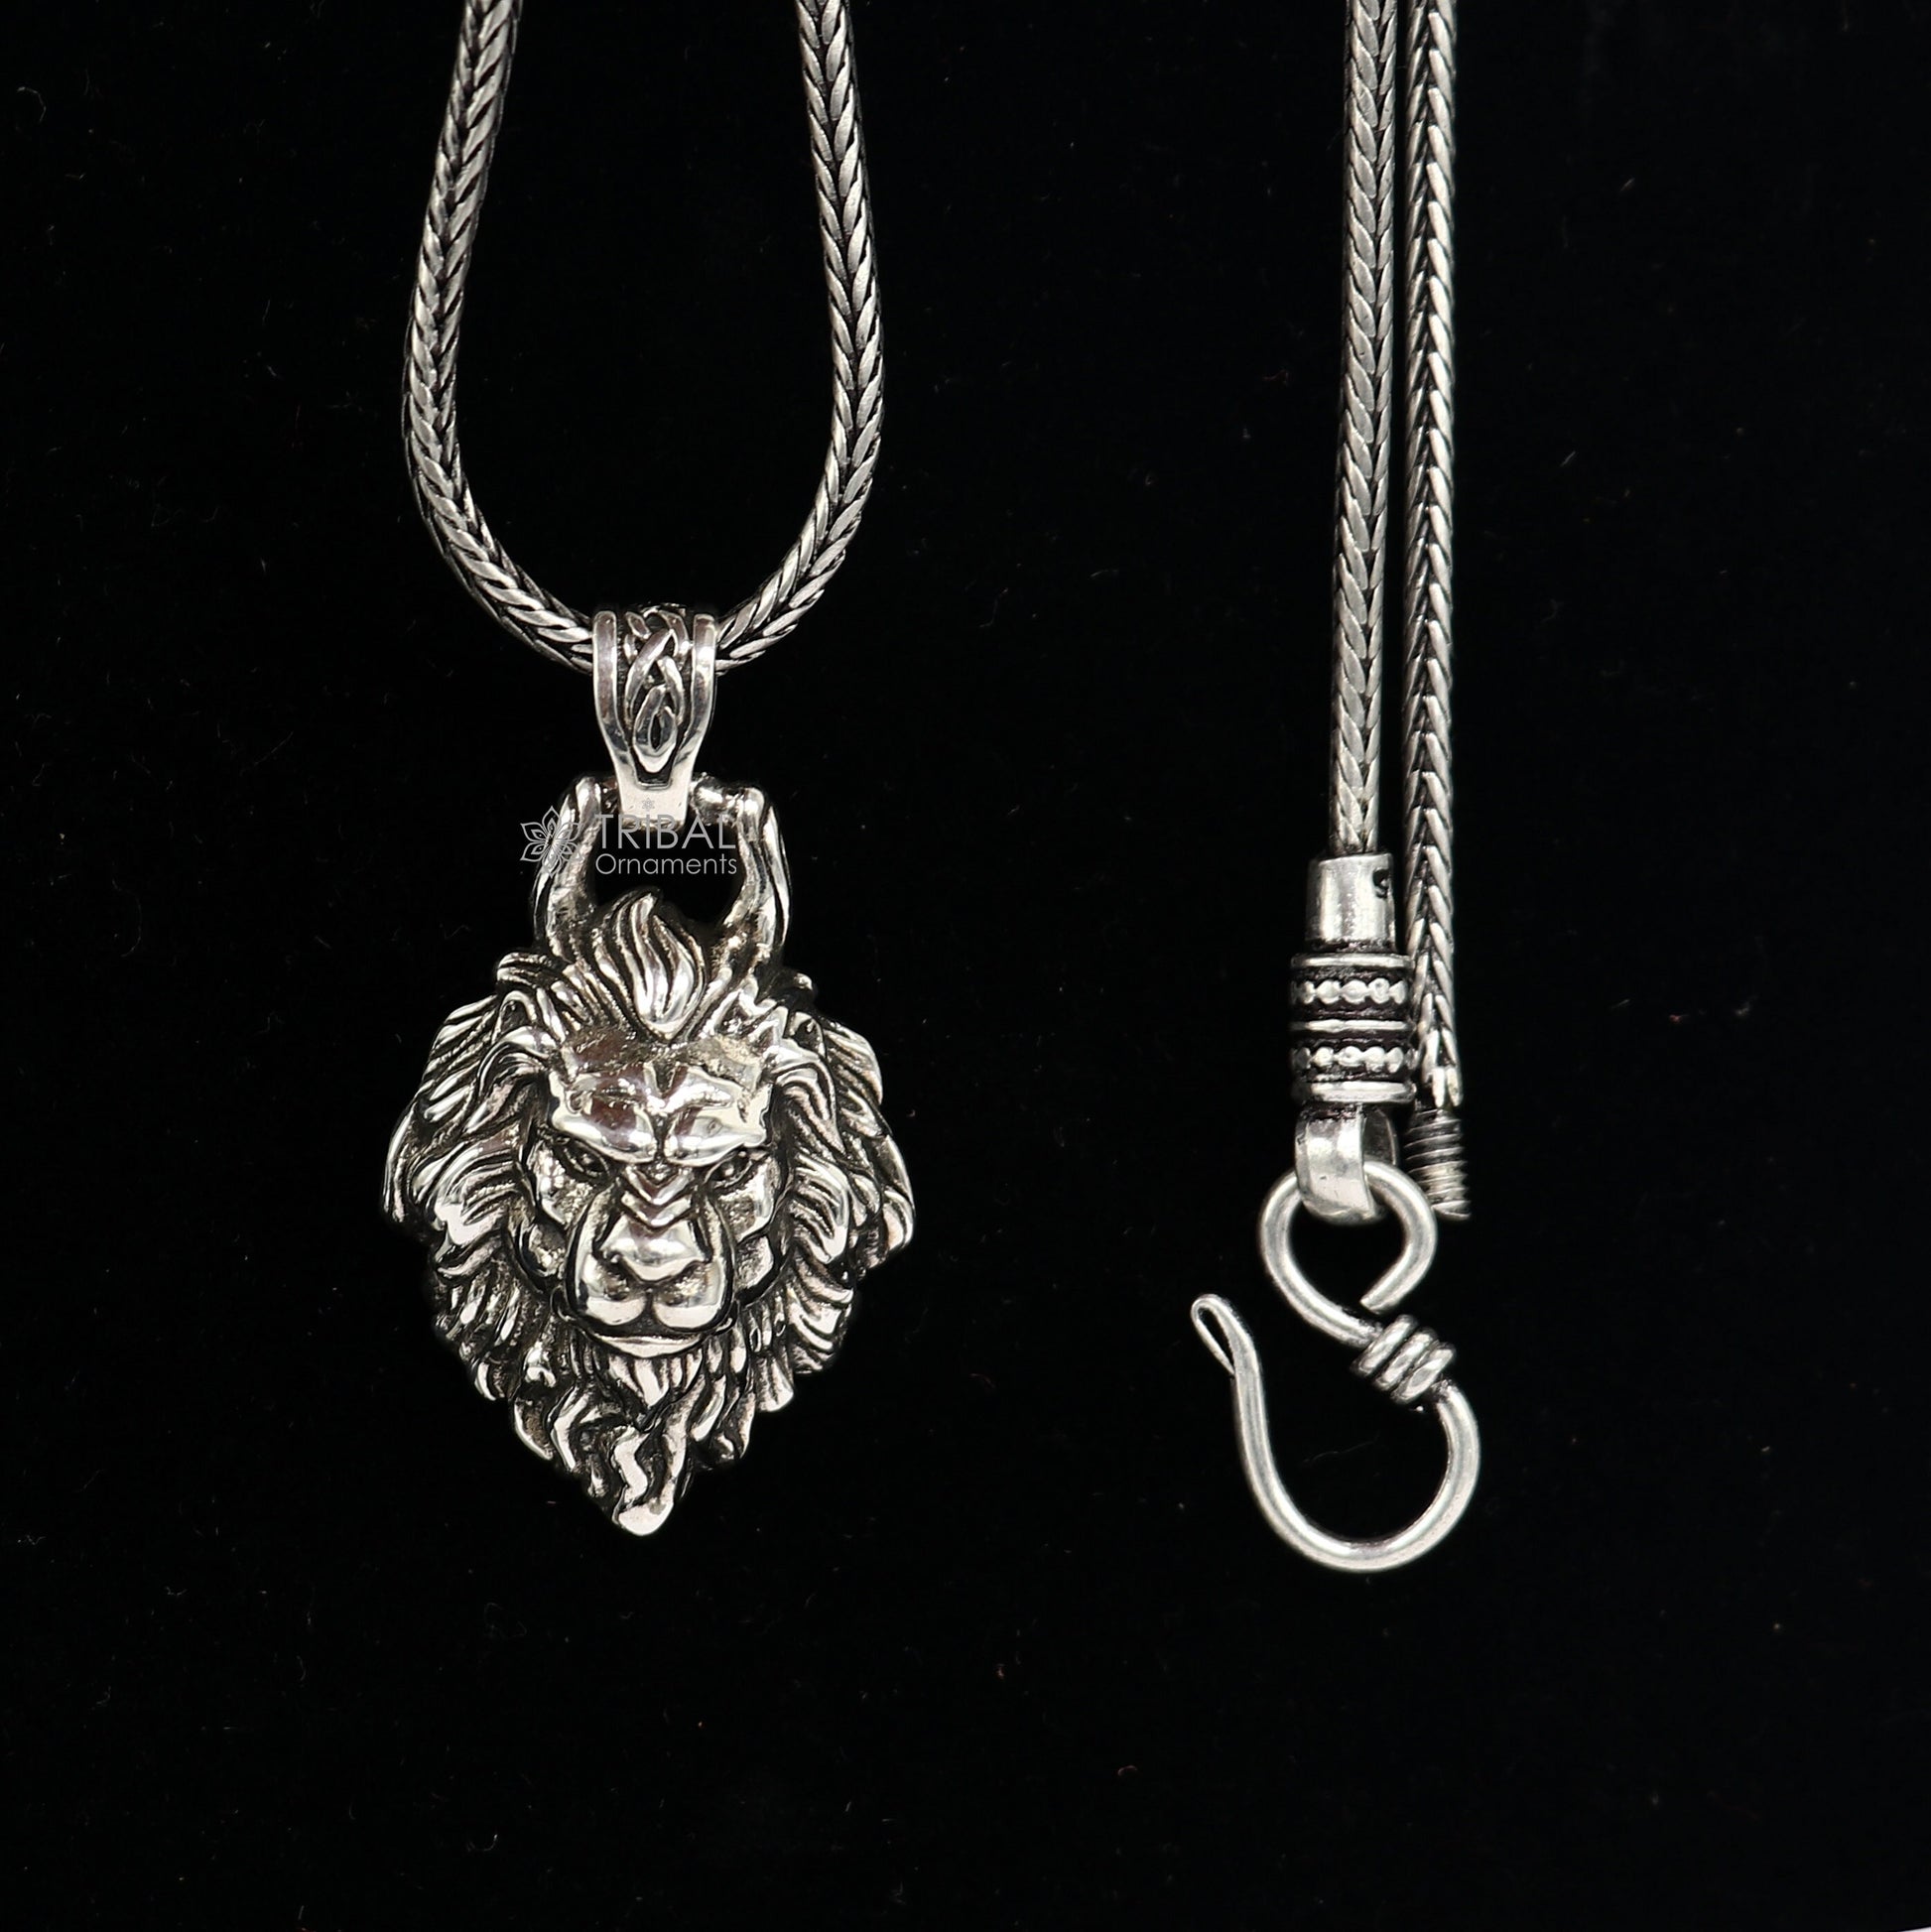 925 pure silver LION FACE pendant best gifting pendant, wheat chain necklace locket best gifting jewelry NSP729 - TRIBAL ORNAMENTS